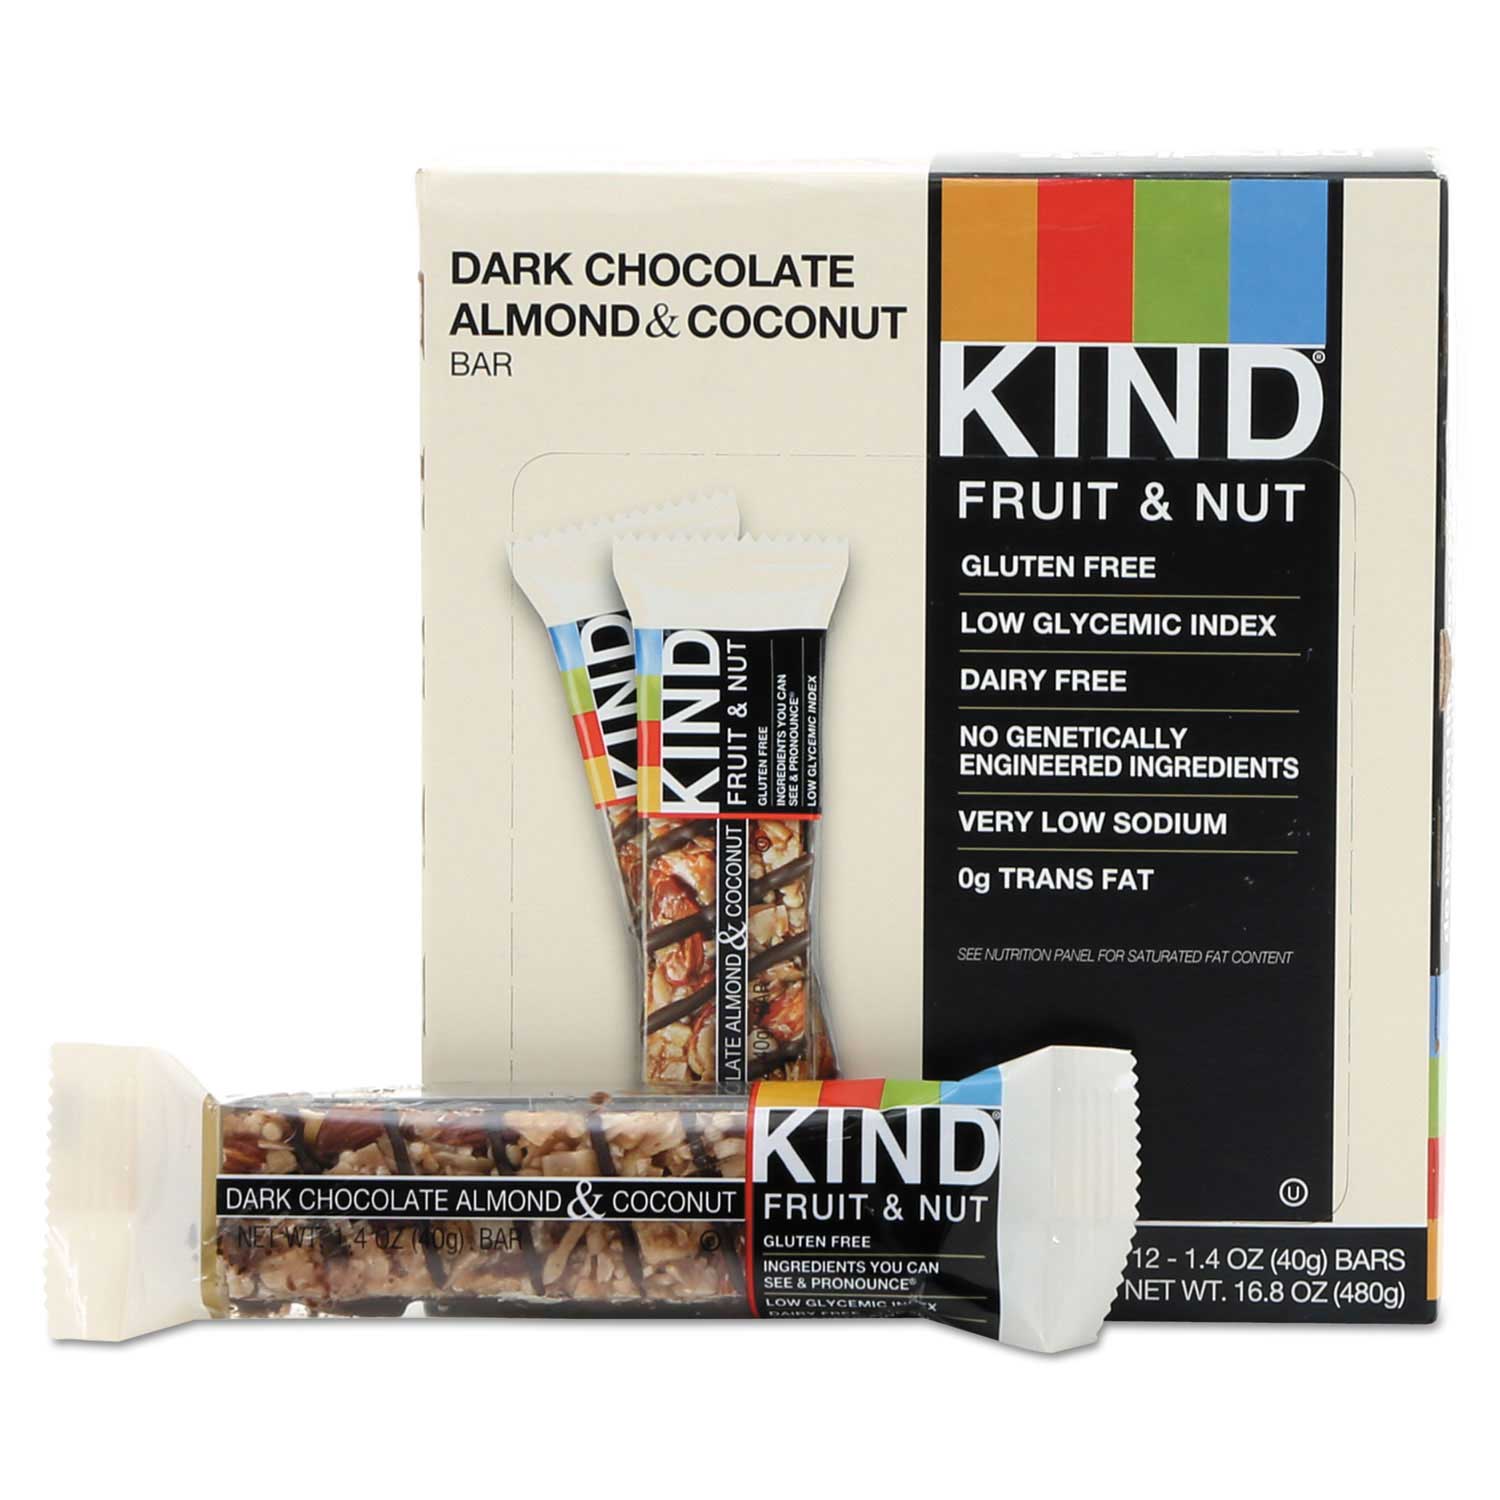 Kind Dark Chocolate Almond and Coconut Fruit and Nut Bar, 1.4 Ounce - 12 per box -- 1 box per case